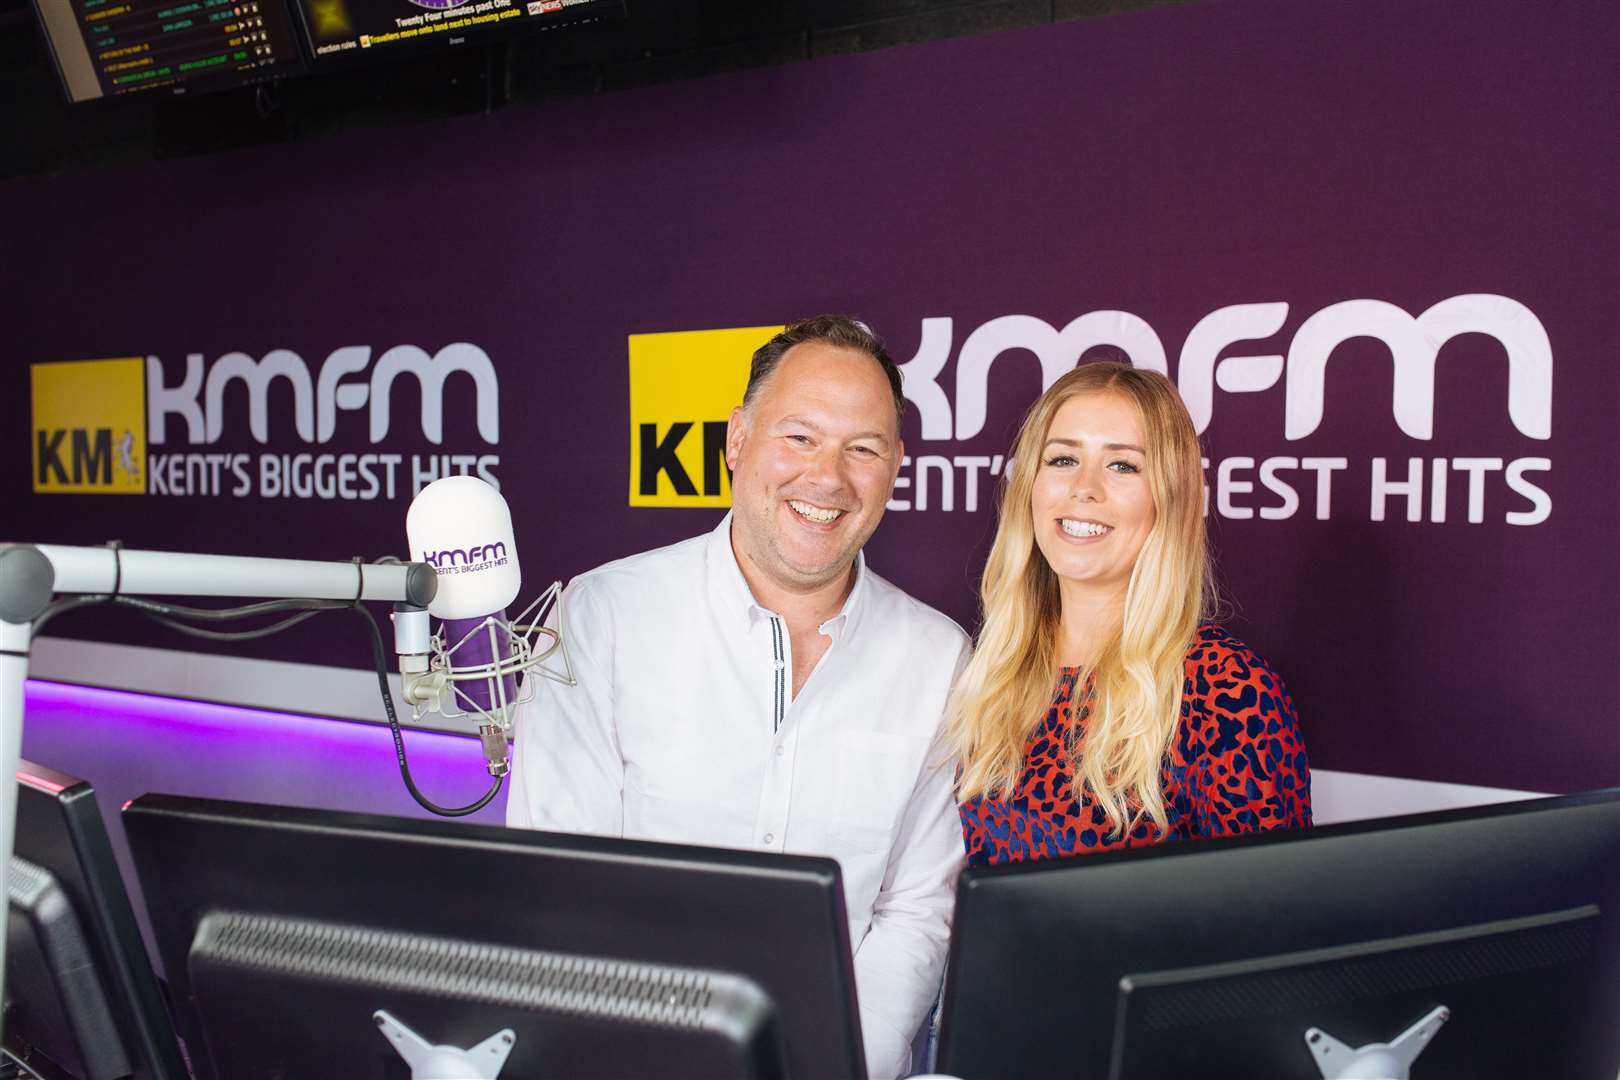 kmfm Breakfast with Garry and Laura is broadcast on KMTV every weekday from 6am